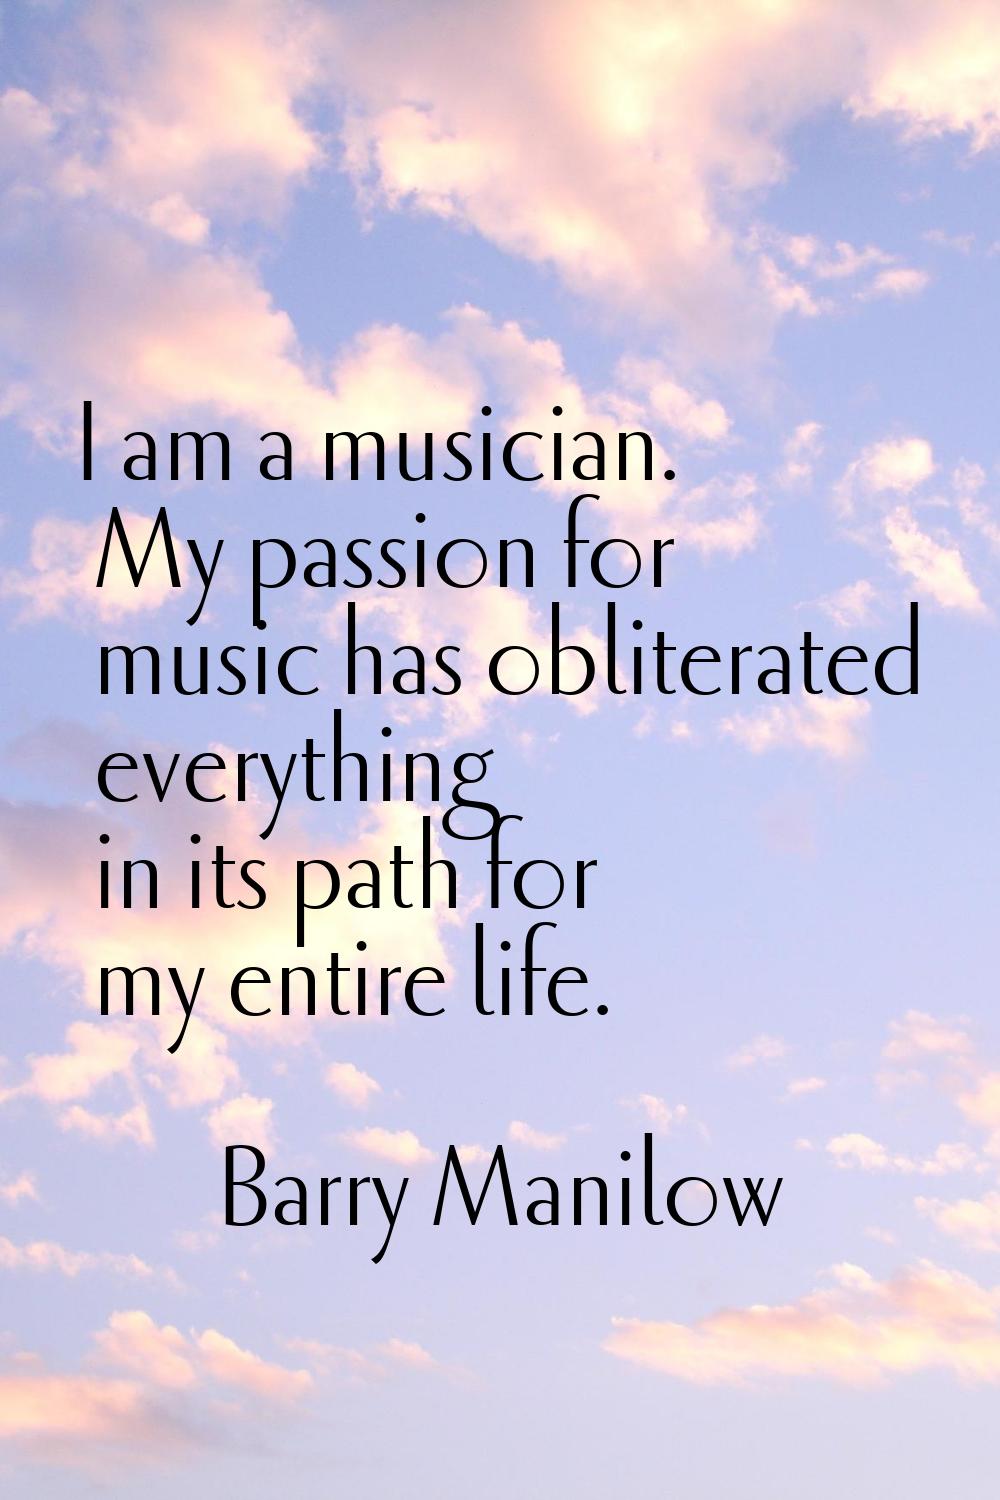 I am a musician. My passion for music has obliterated everything in its path for my entire life.